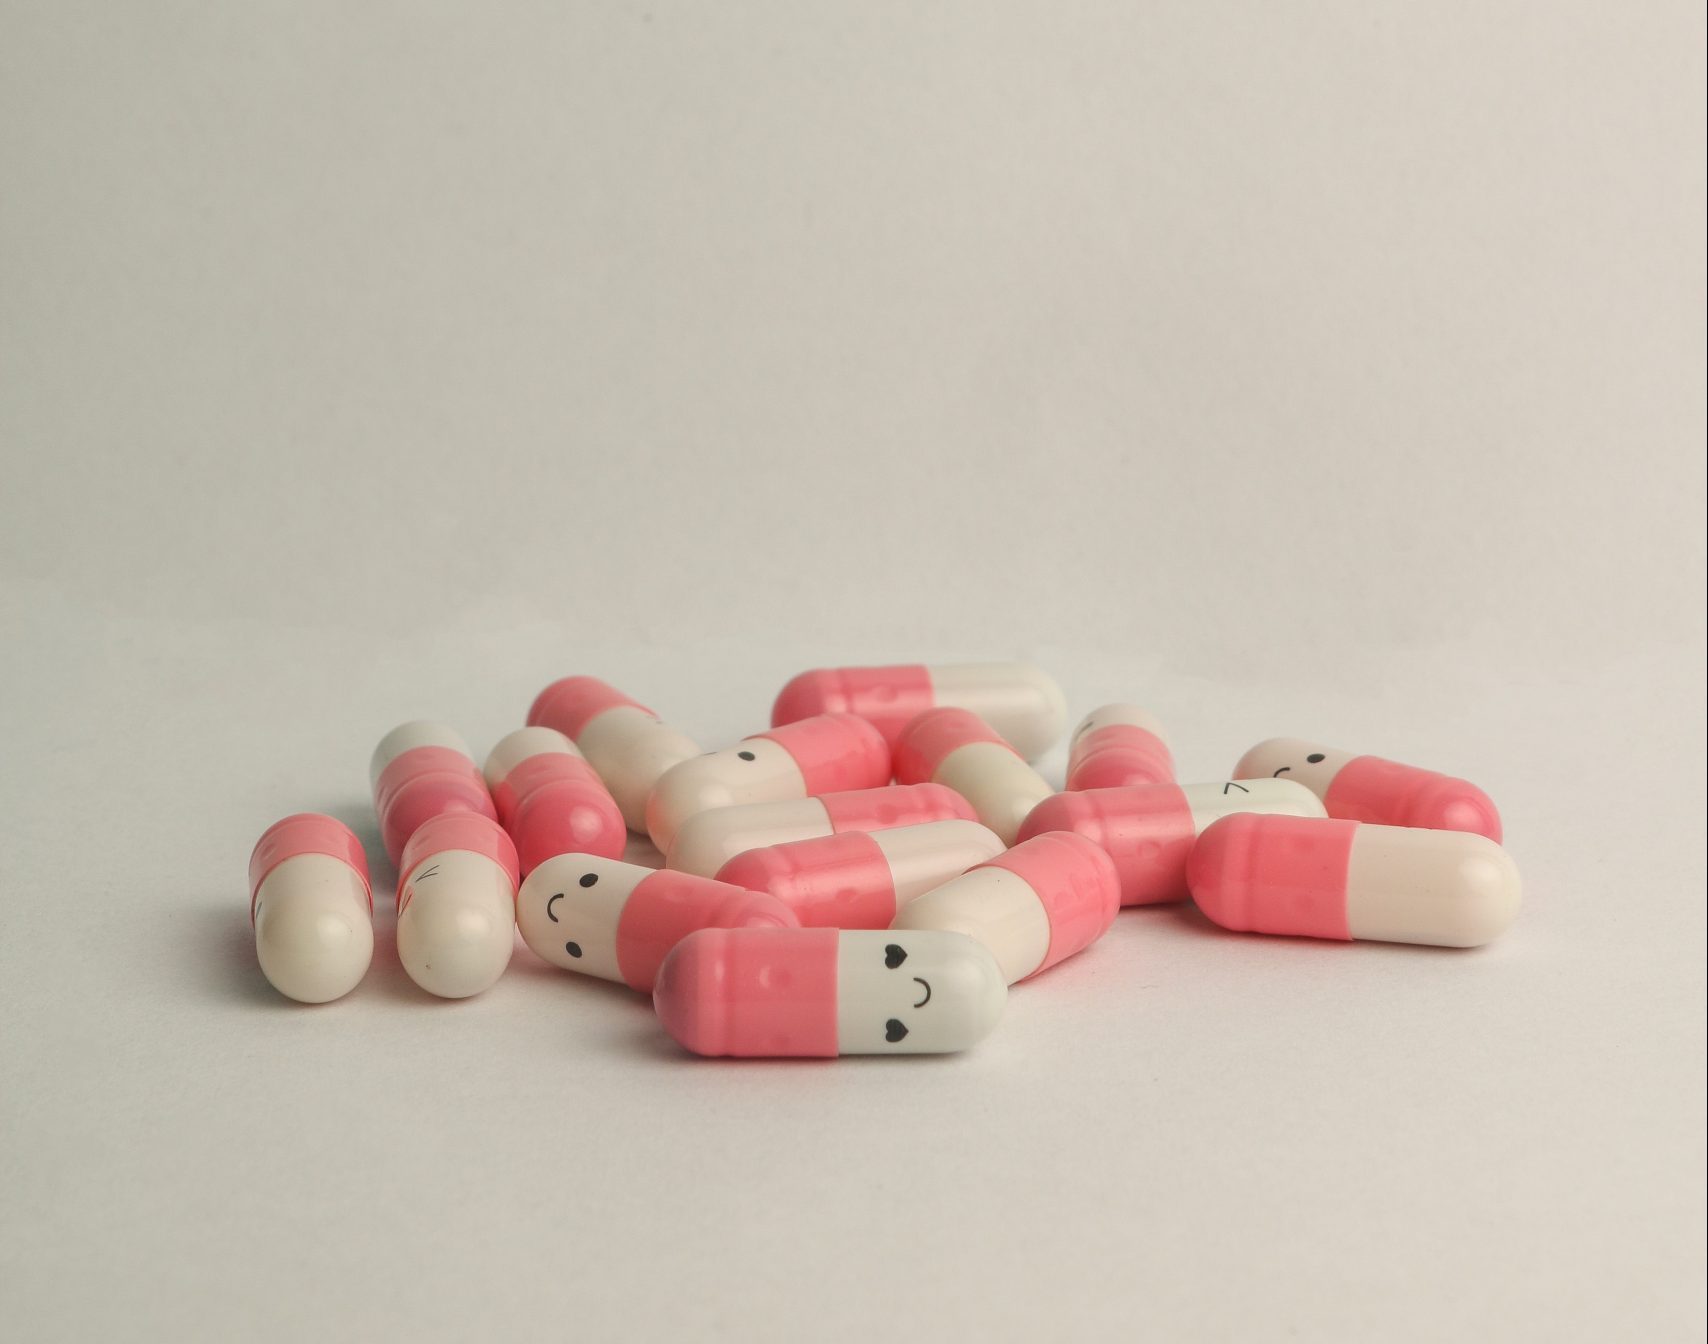 White and pink pills with smiley face on white end to depict antidepressants